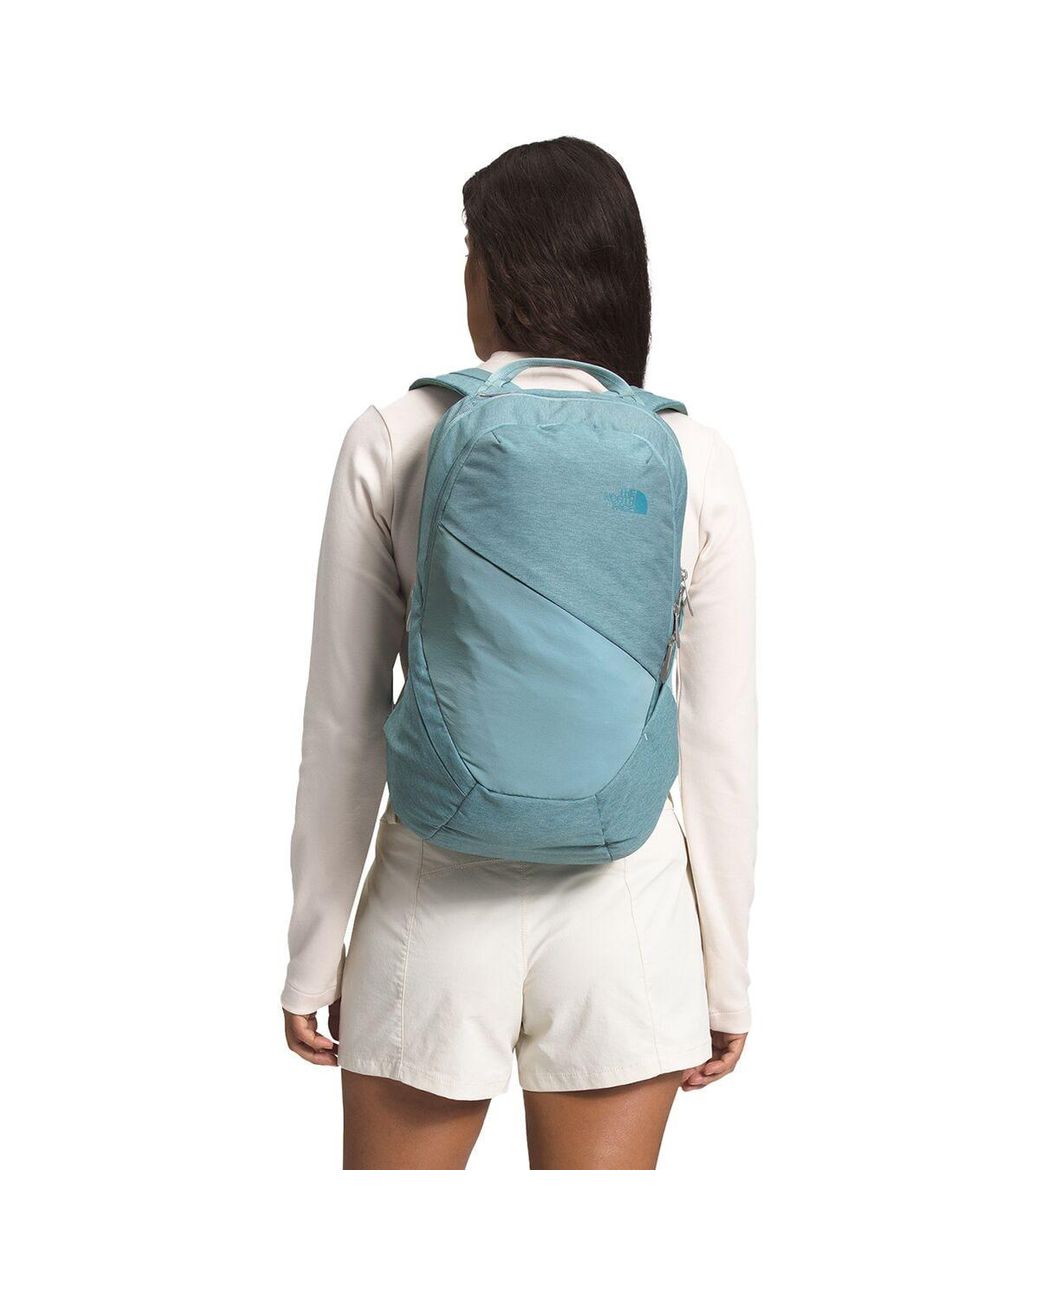 The North Face Isabella 17l Backpack in Blue | Lyst